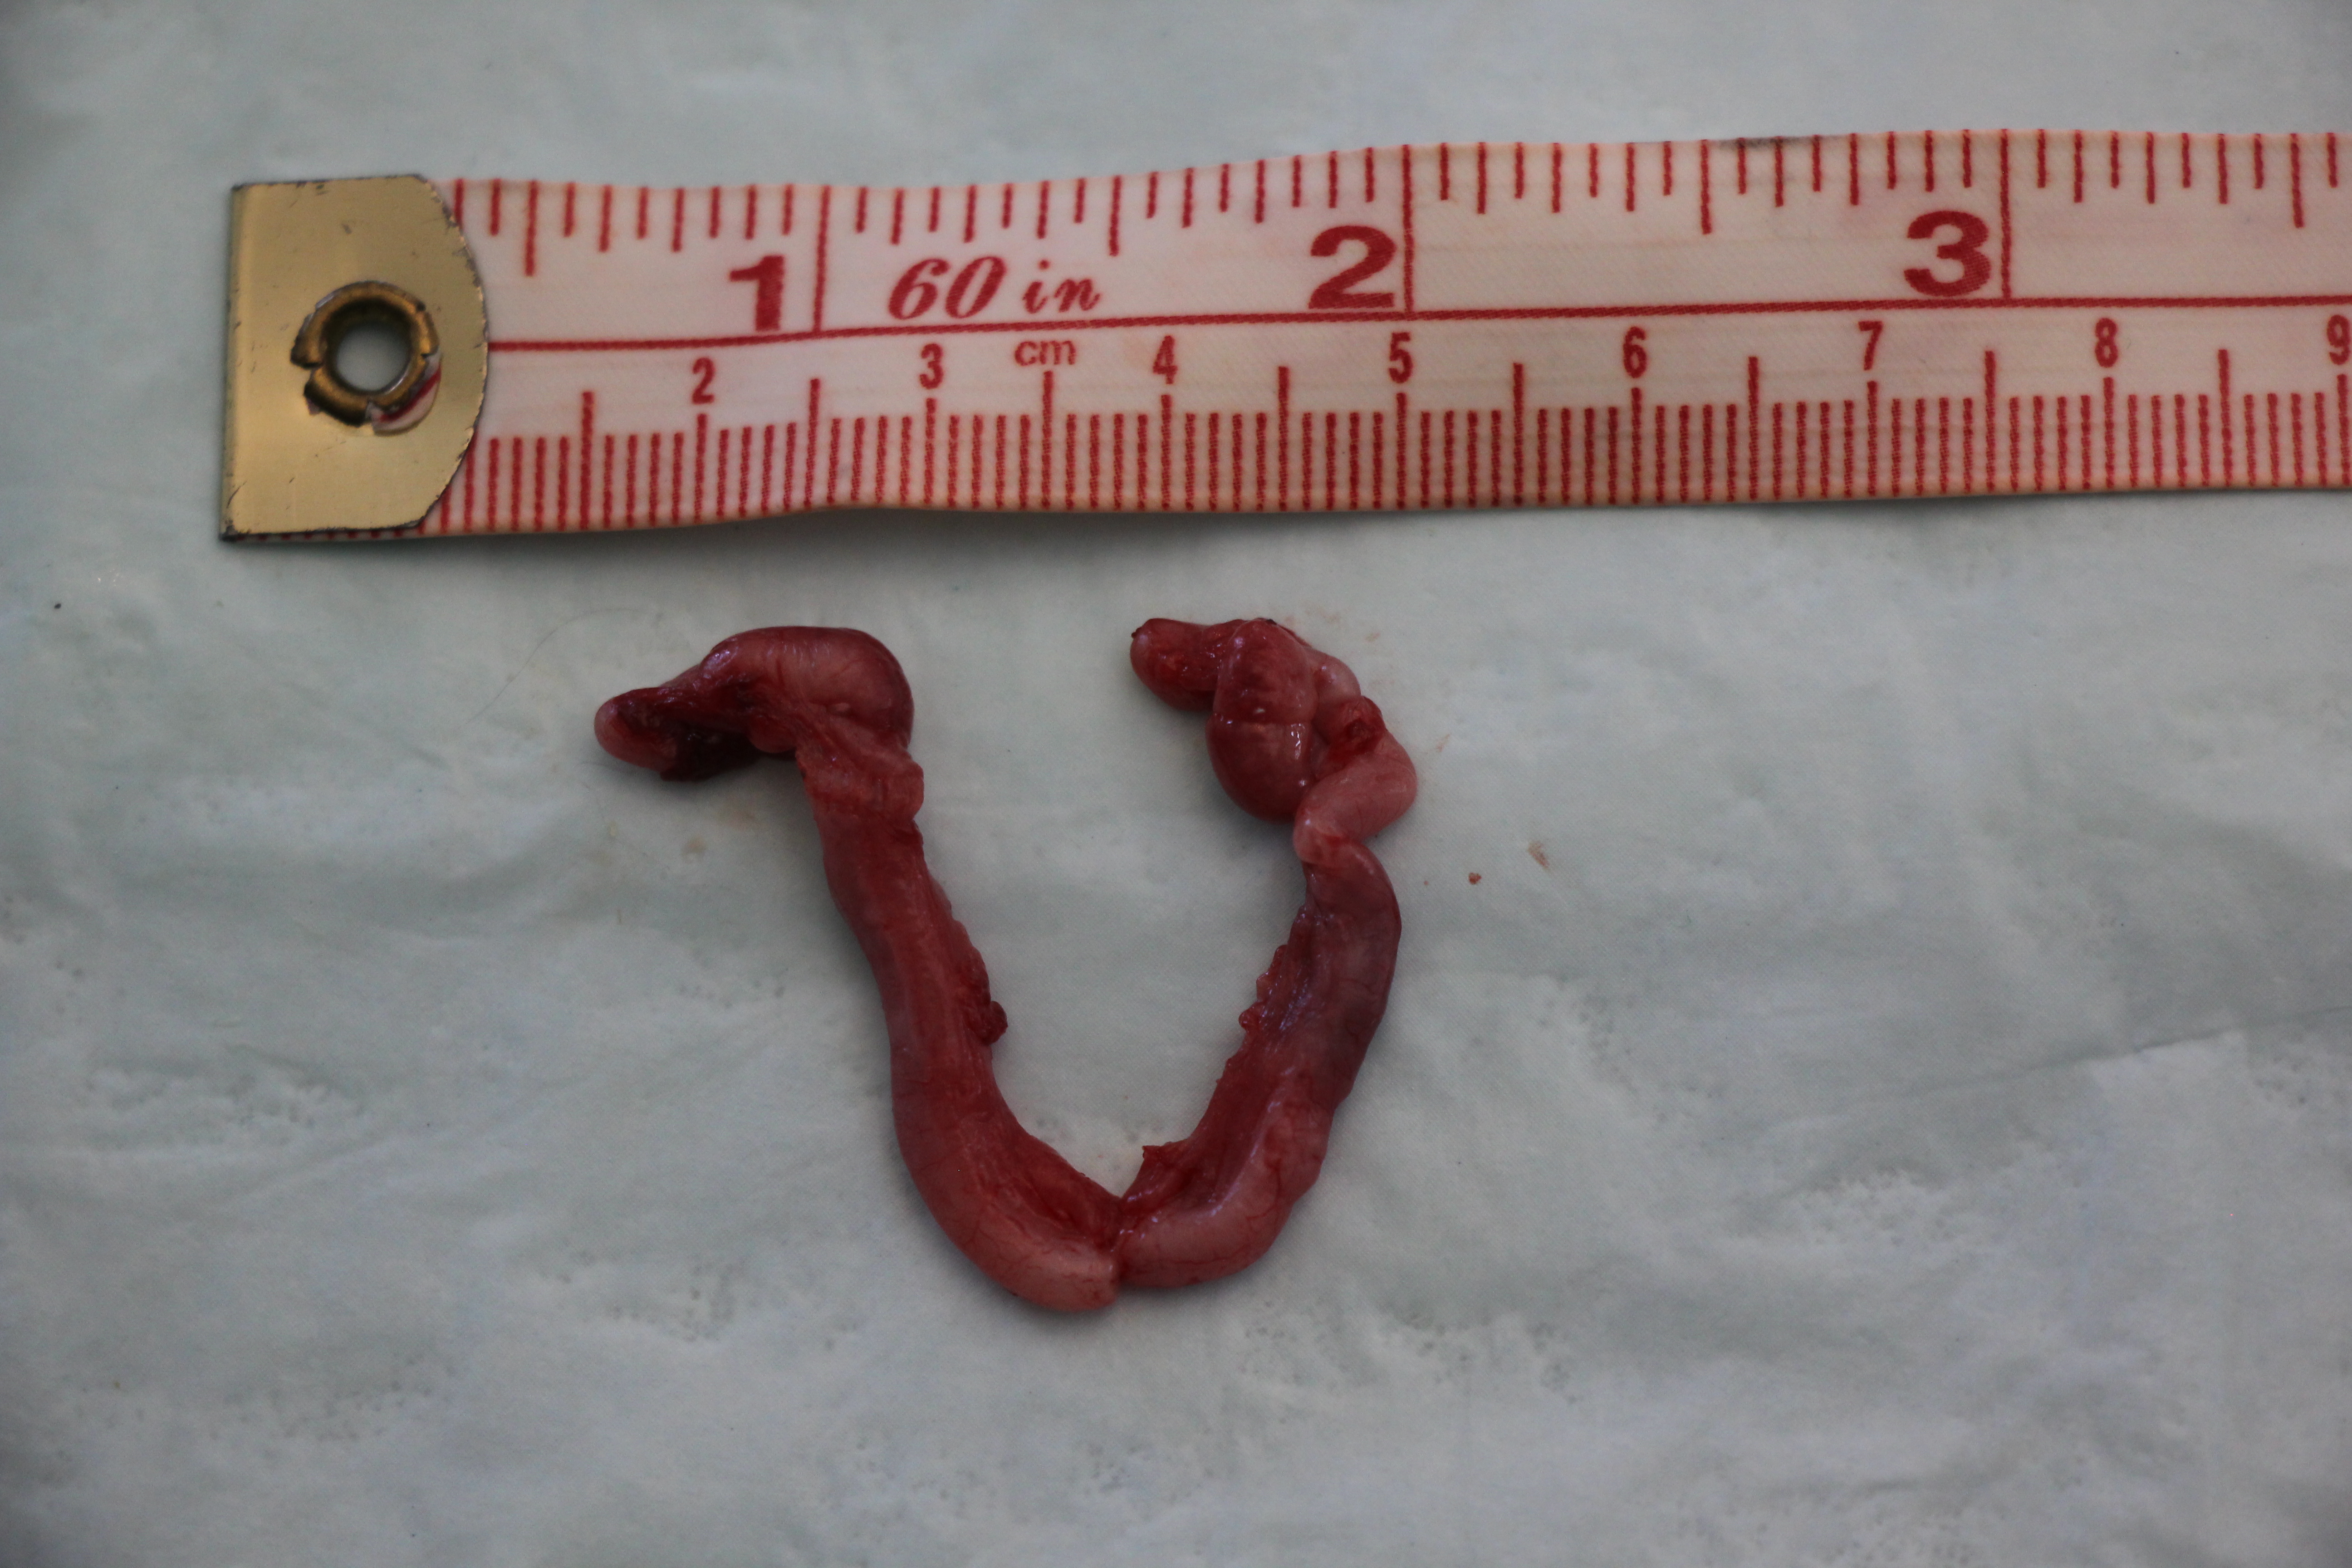 Normal primiparous (immature) uterus from a 2-month old kitten.